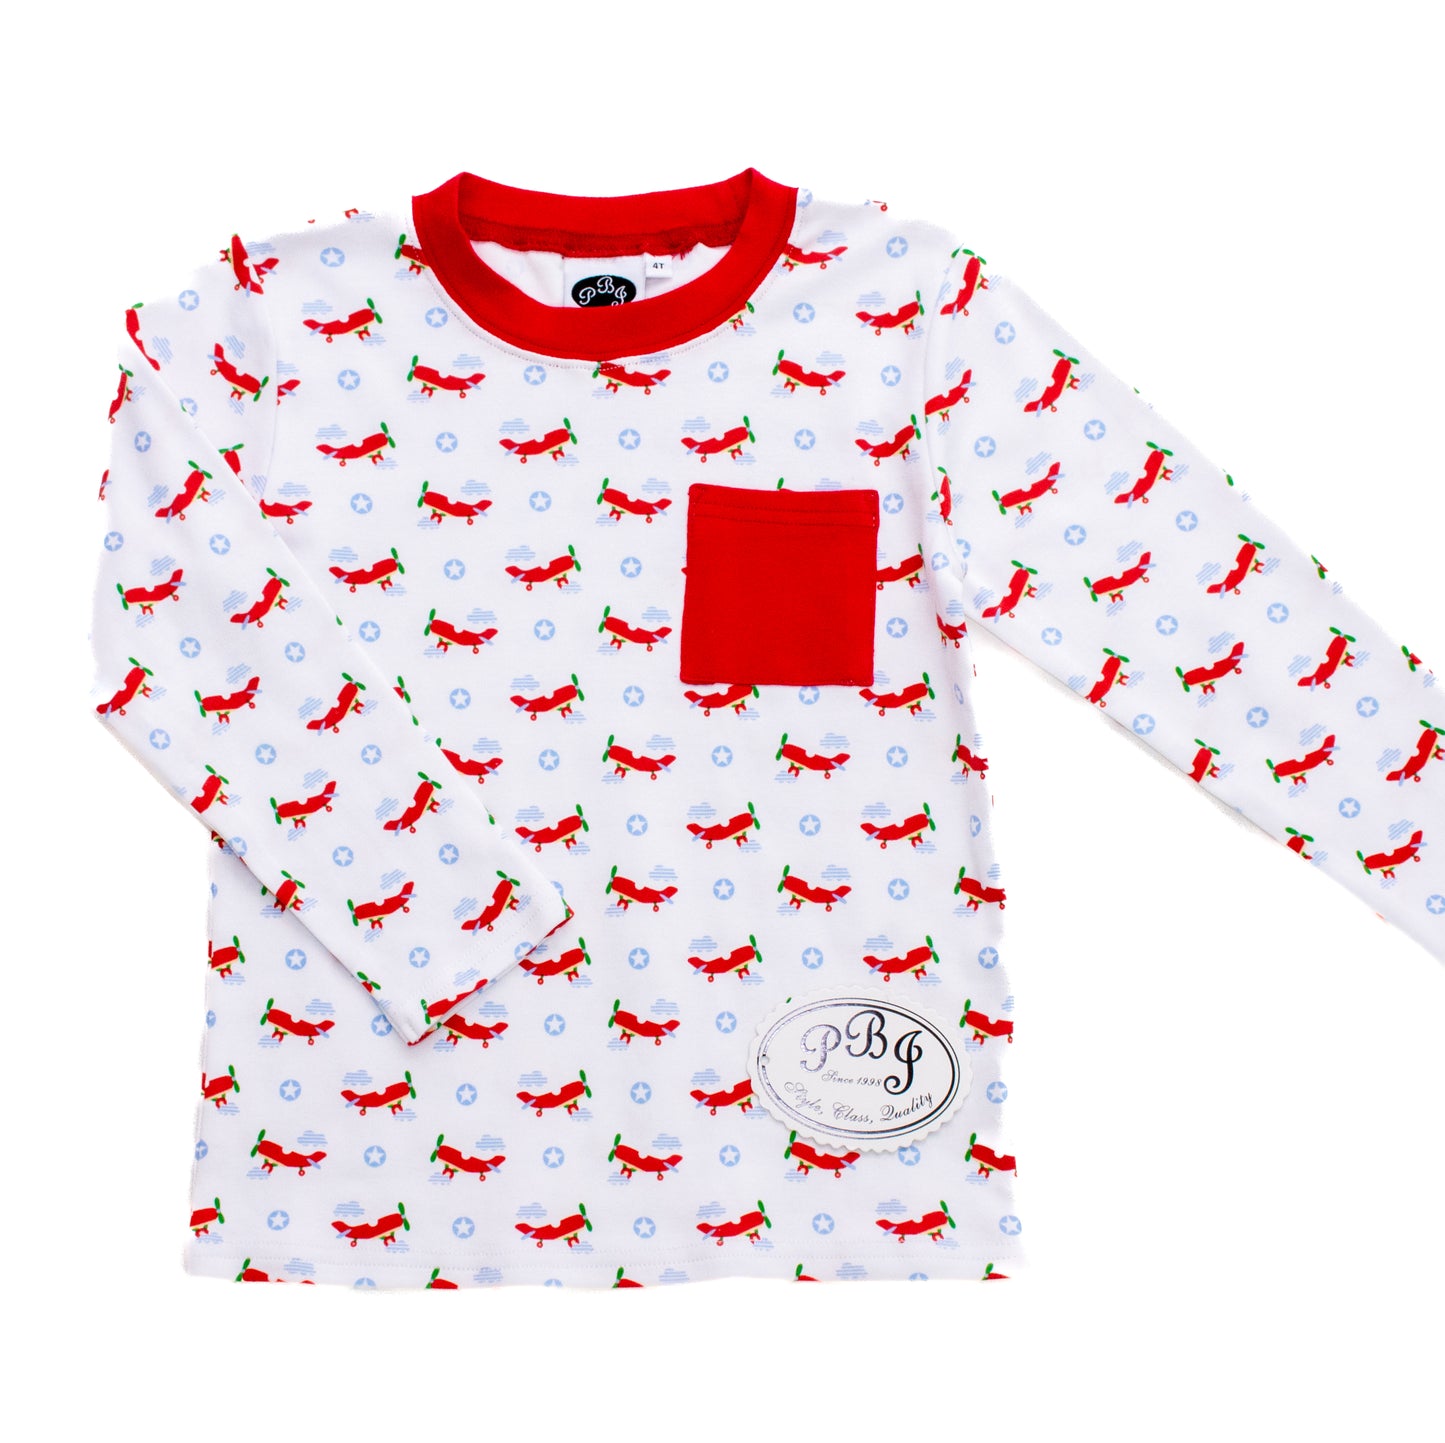 LS Pocket Shirt Airplanes with Red